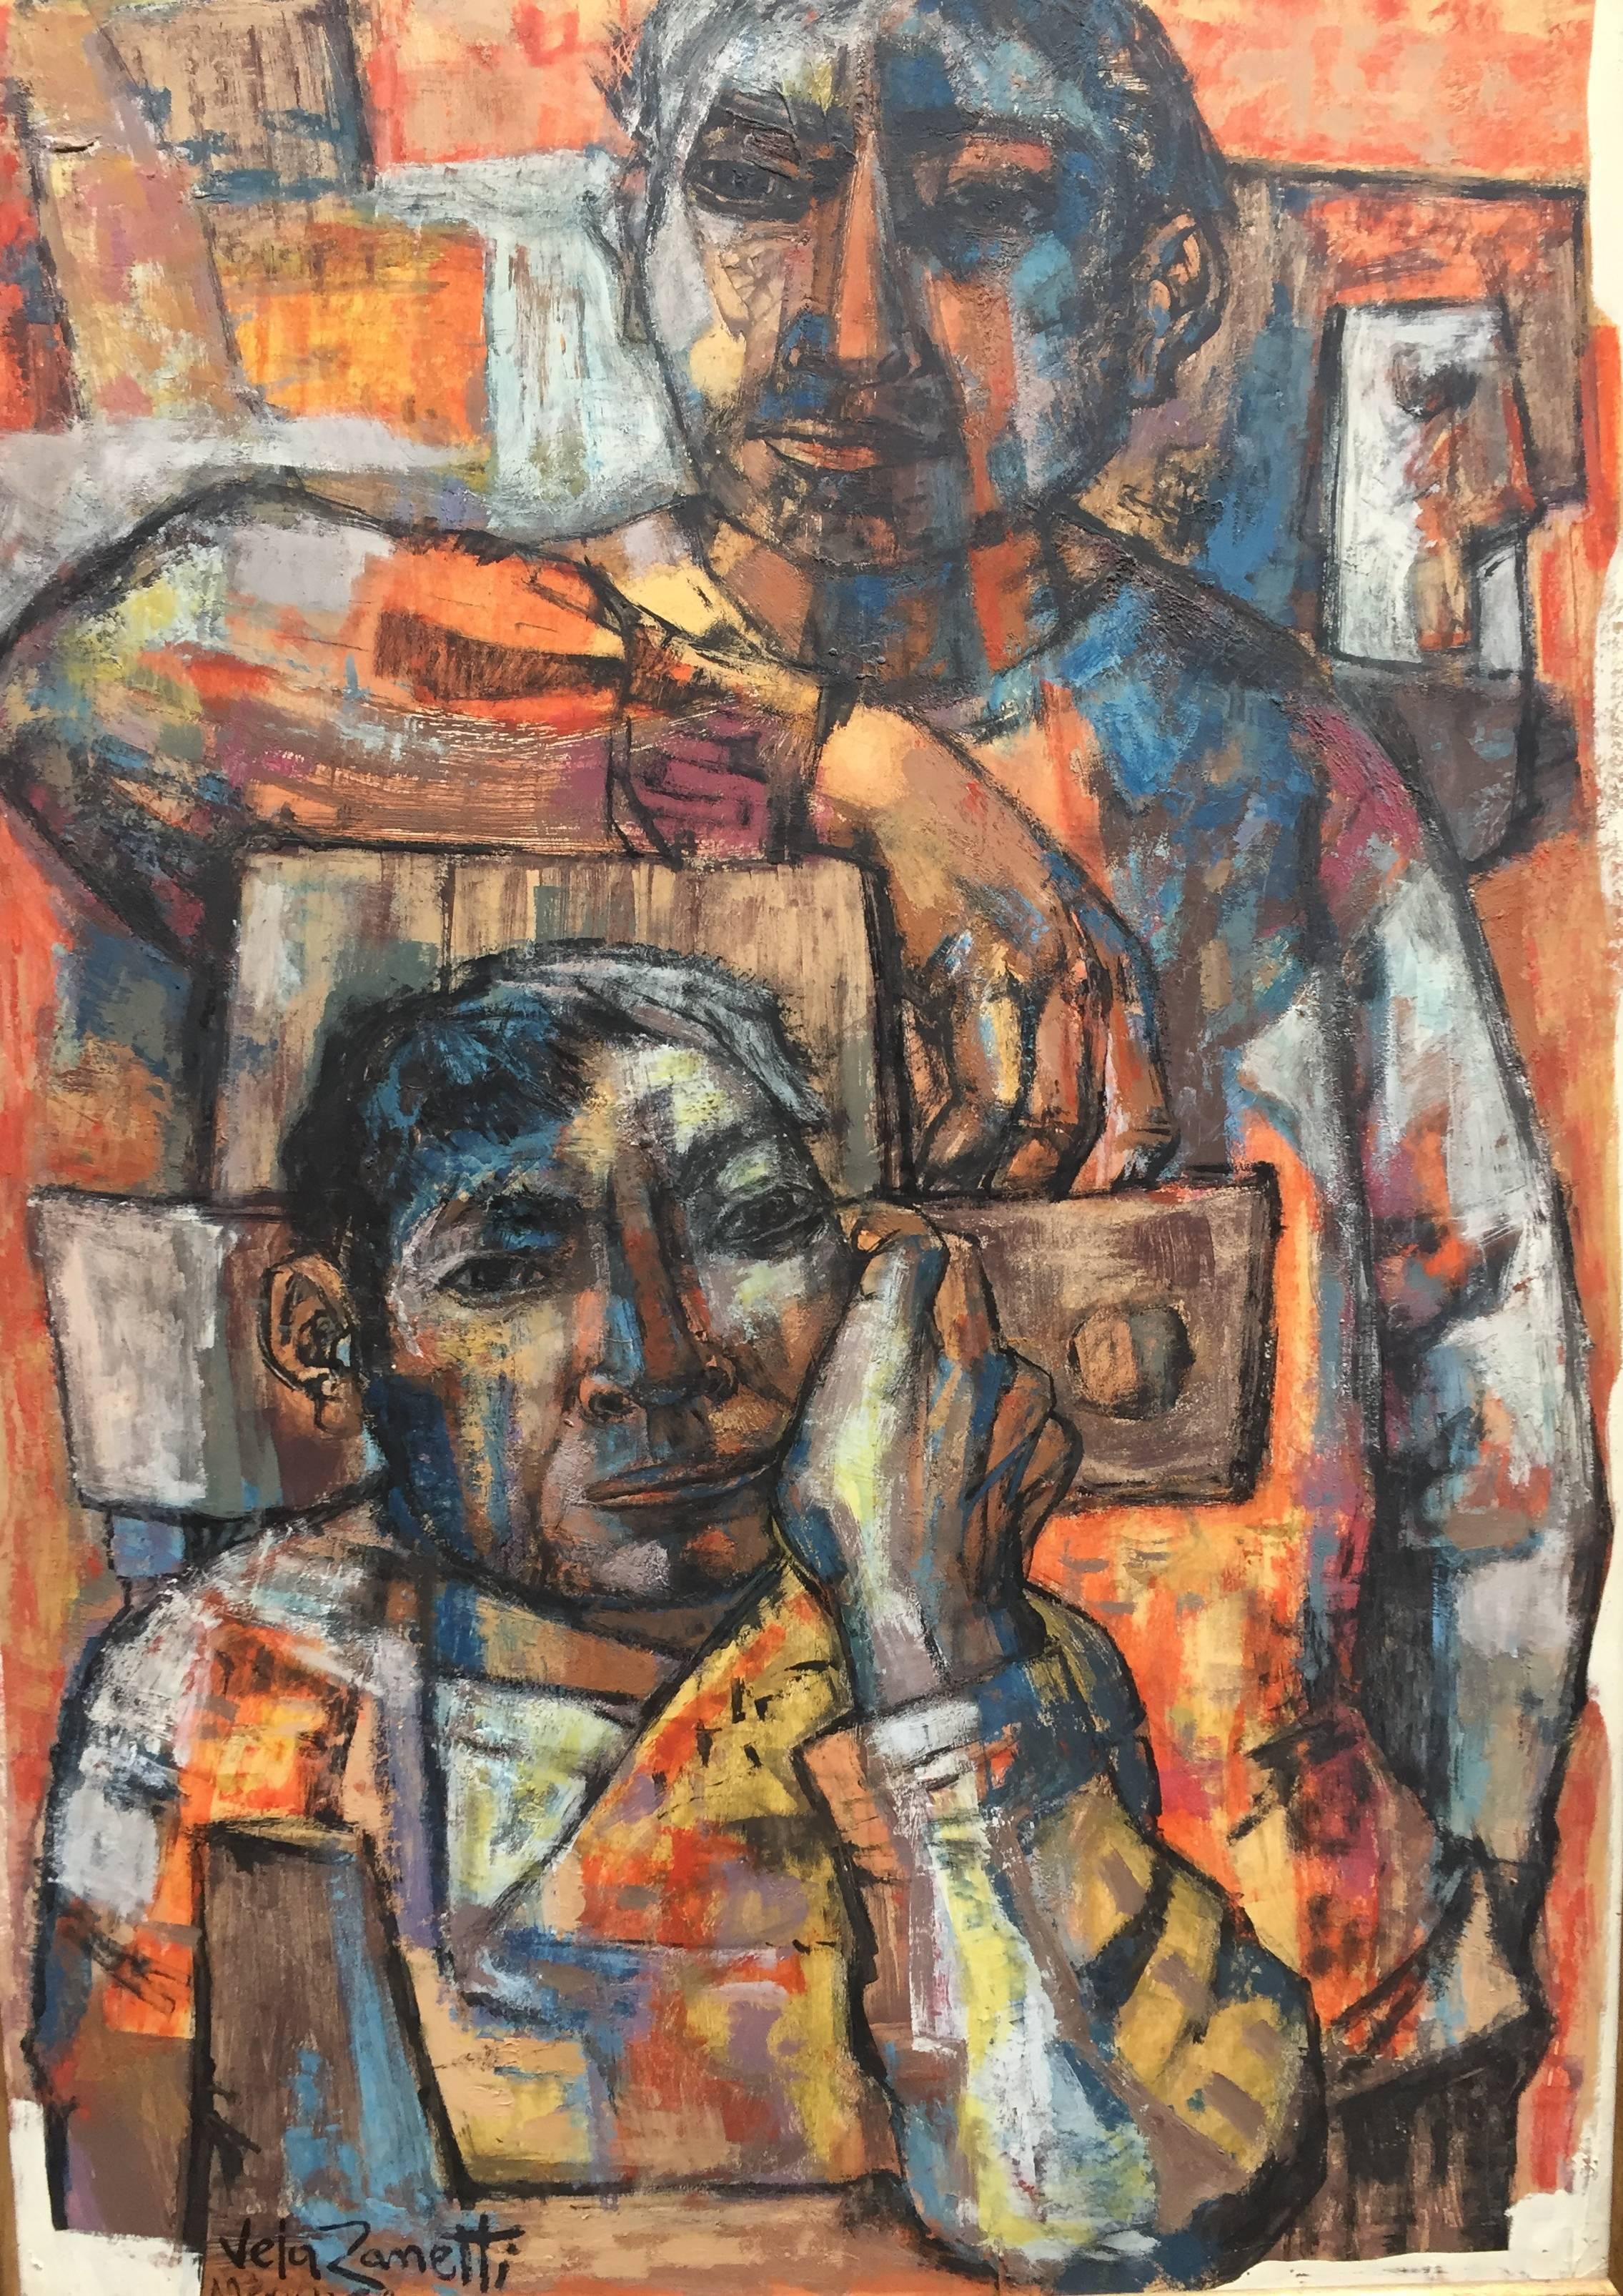 Jose Vela Zanetti Painting of Two Mexican Figures 2